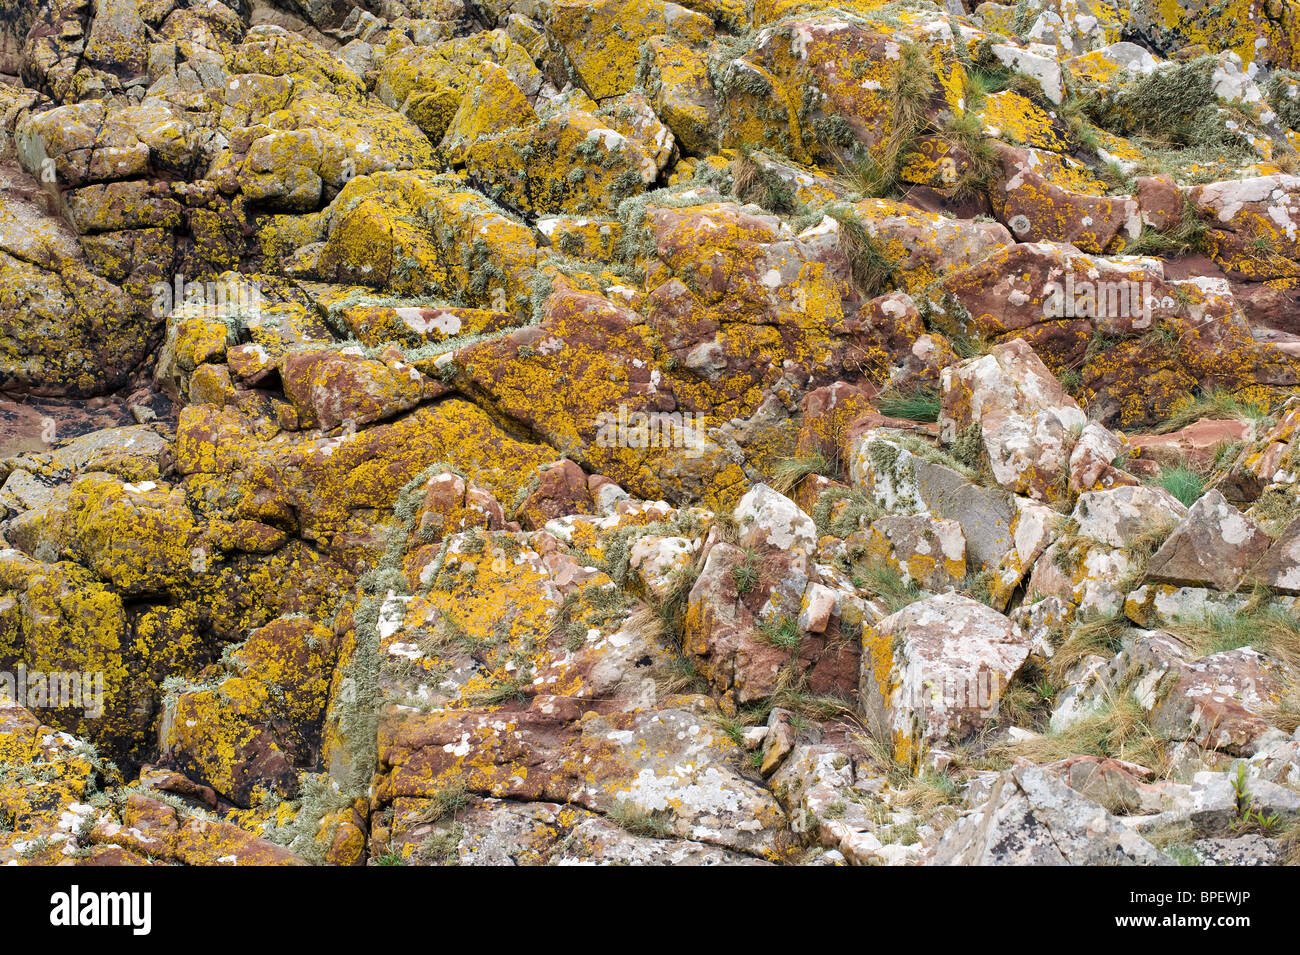 Colourful assemblage of lichens on rocks above the high tide line along the Severn estuary in Somerset England Stock Photo